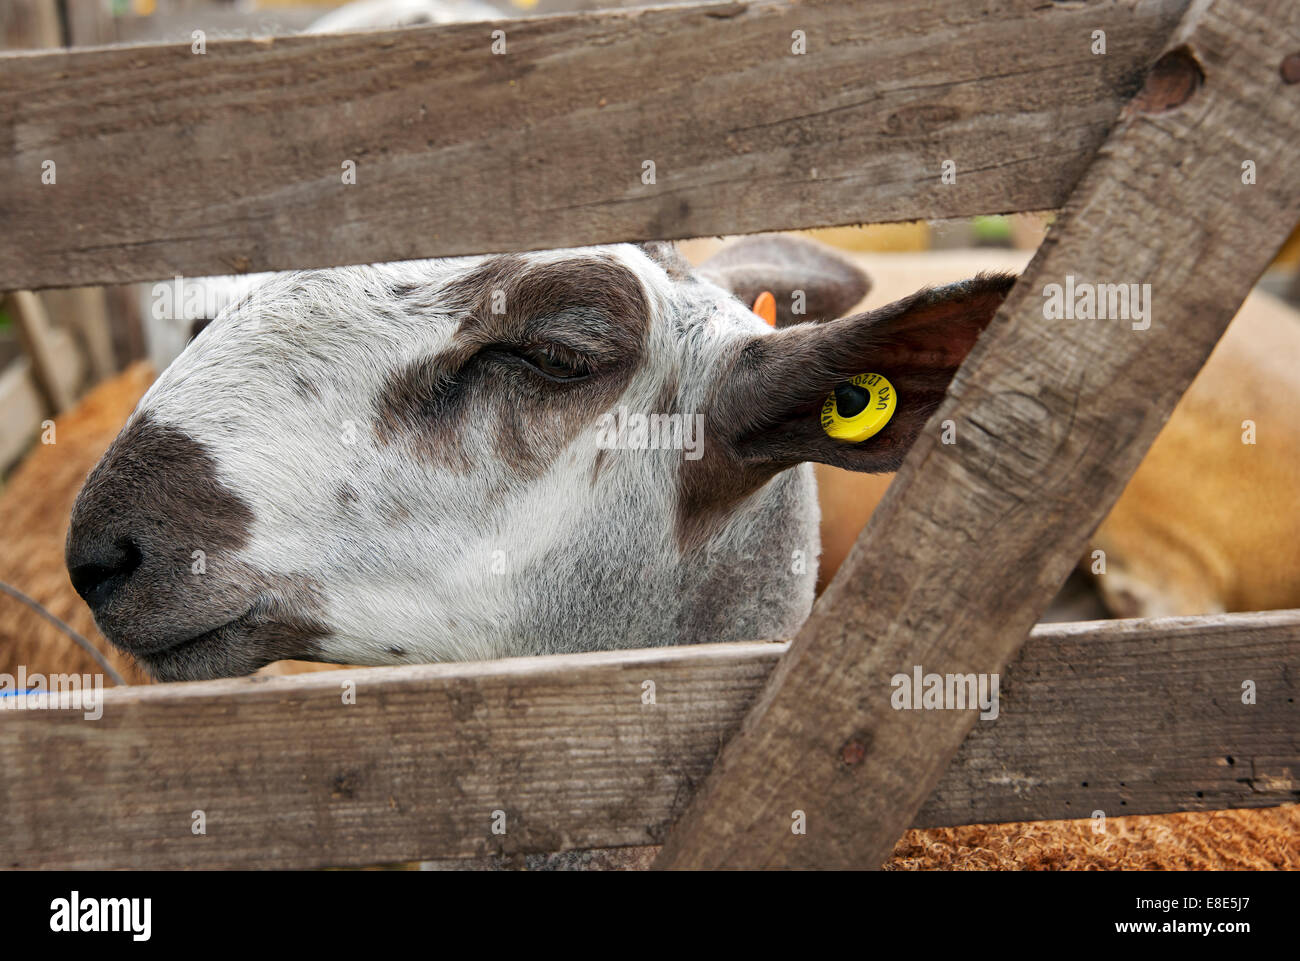 Close up of Sheep in pen England UK United Kingdom GB Great Britain Stock Photo